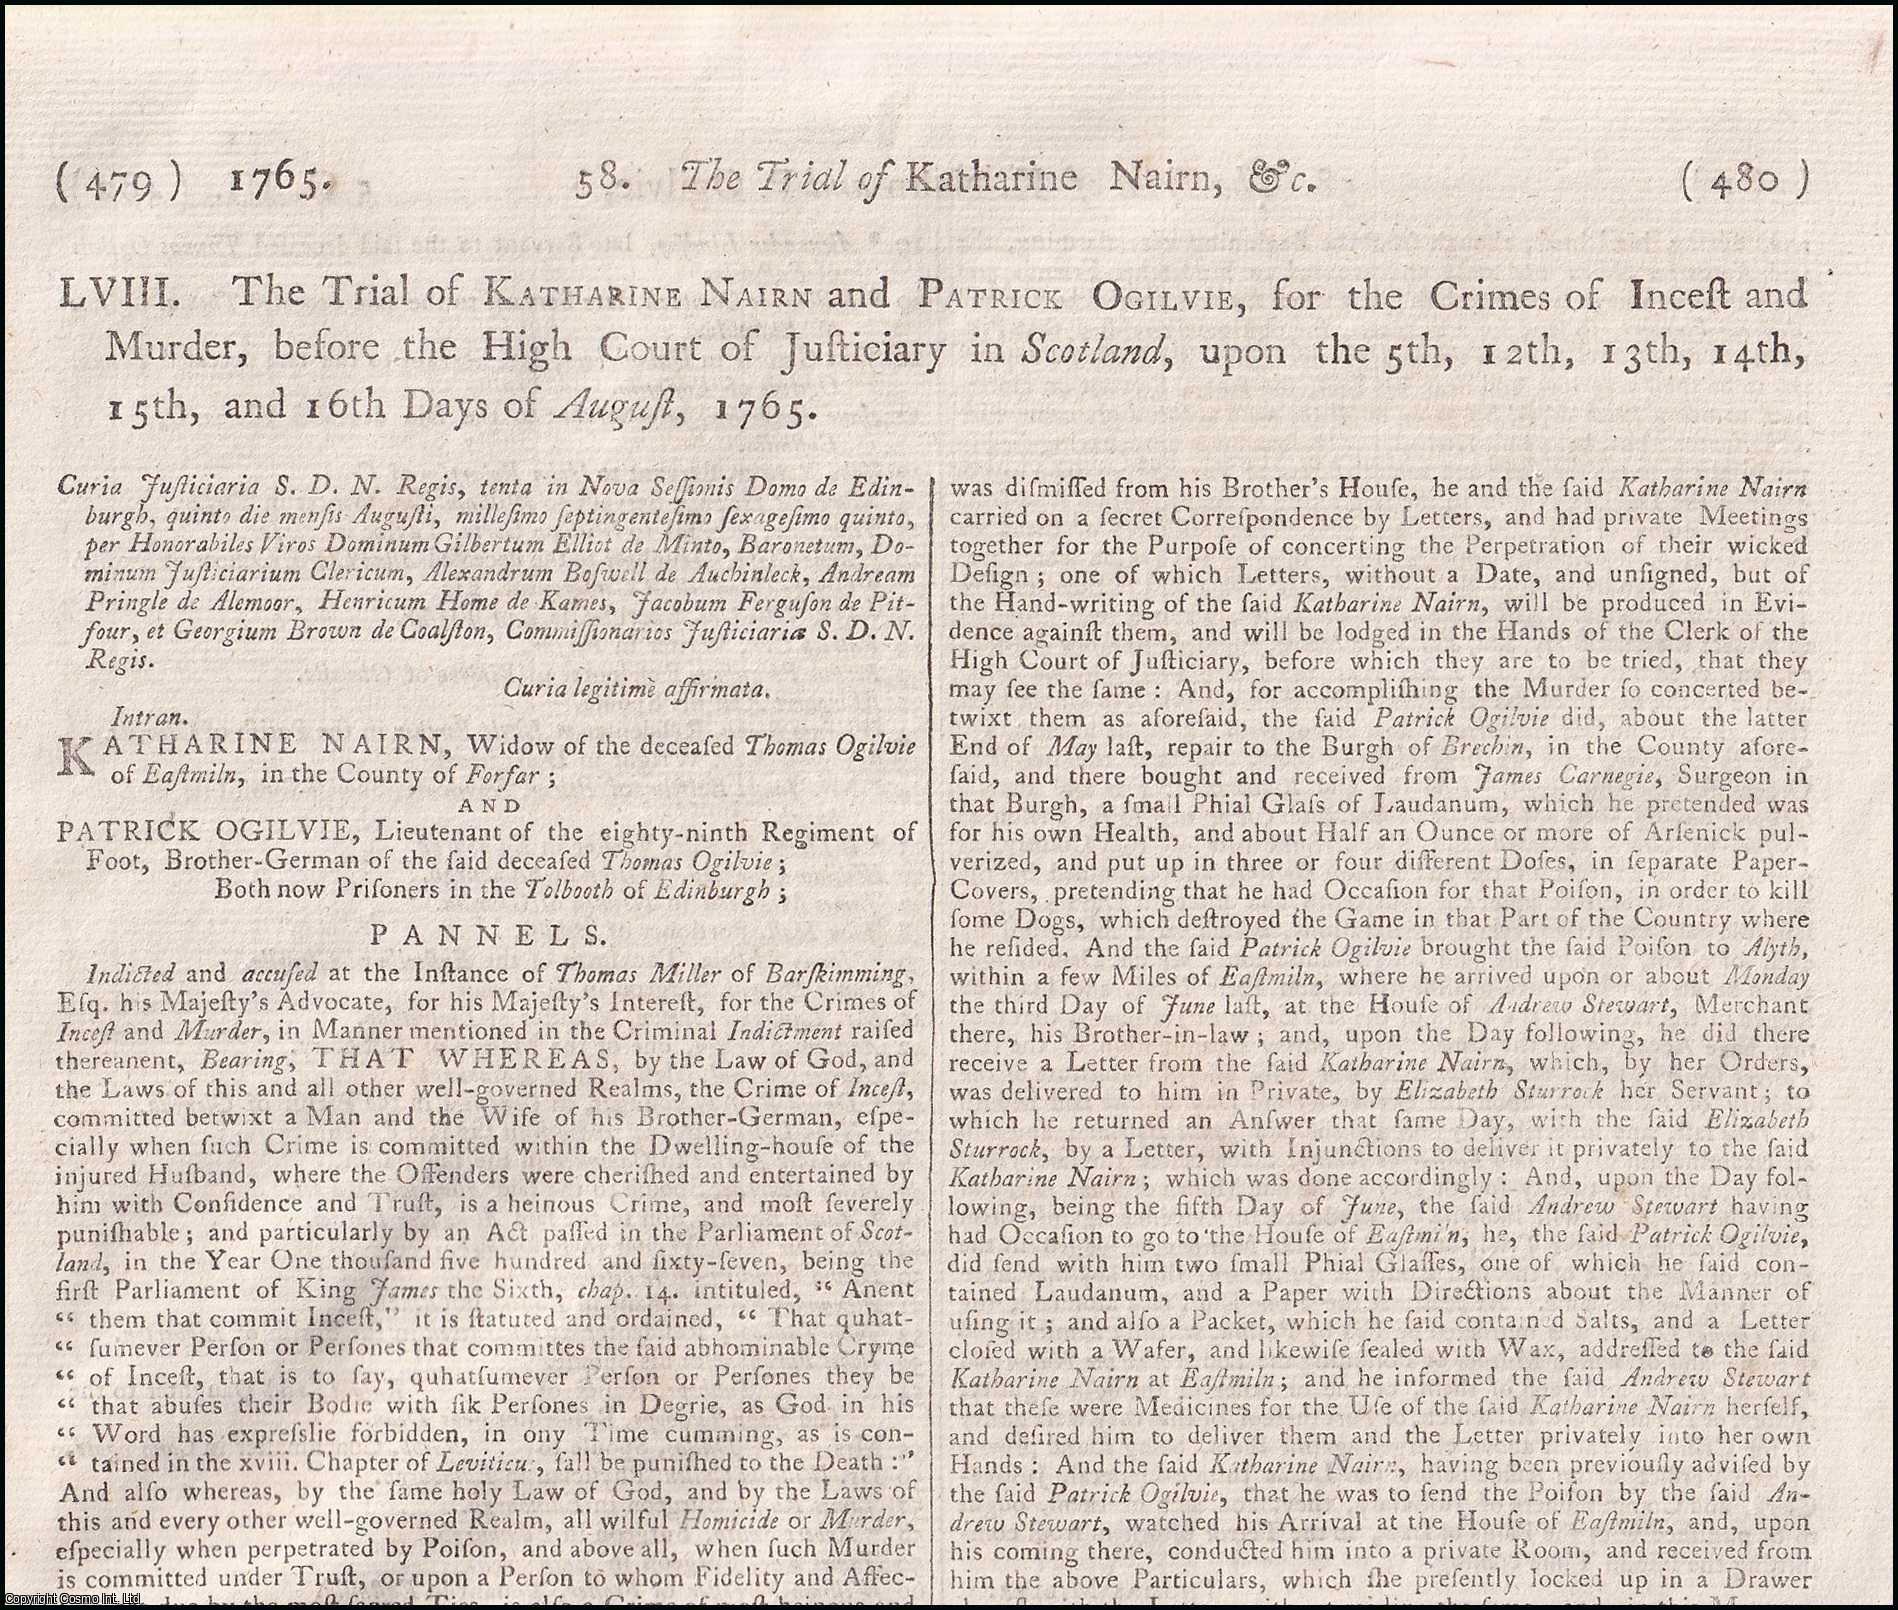 [Trial]. - The Trial of Katharine Nairn and Patrick Ogilvie, for the Crimes of Incest and Murder, before the High Court of Justiciary in Scotland, upon the 5th, 12th, 13th, 14th, 15th, and 16th Days of August, 1765. An original report from the Collected State Trials.